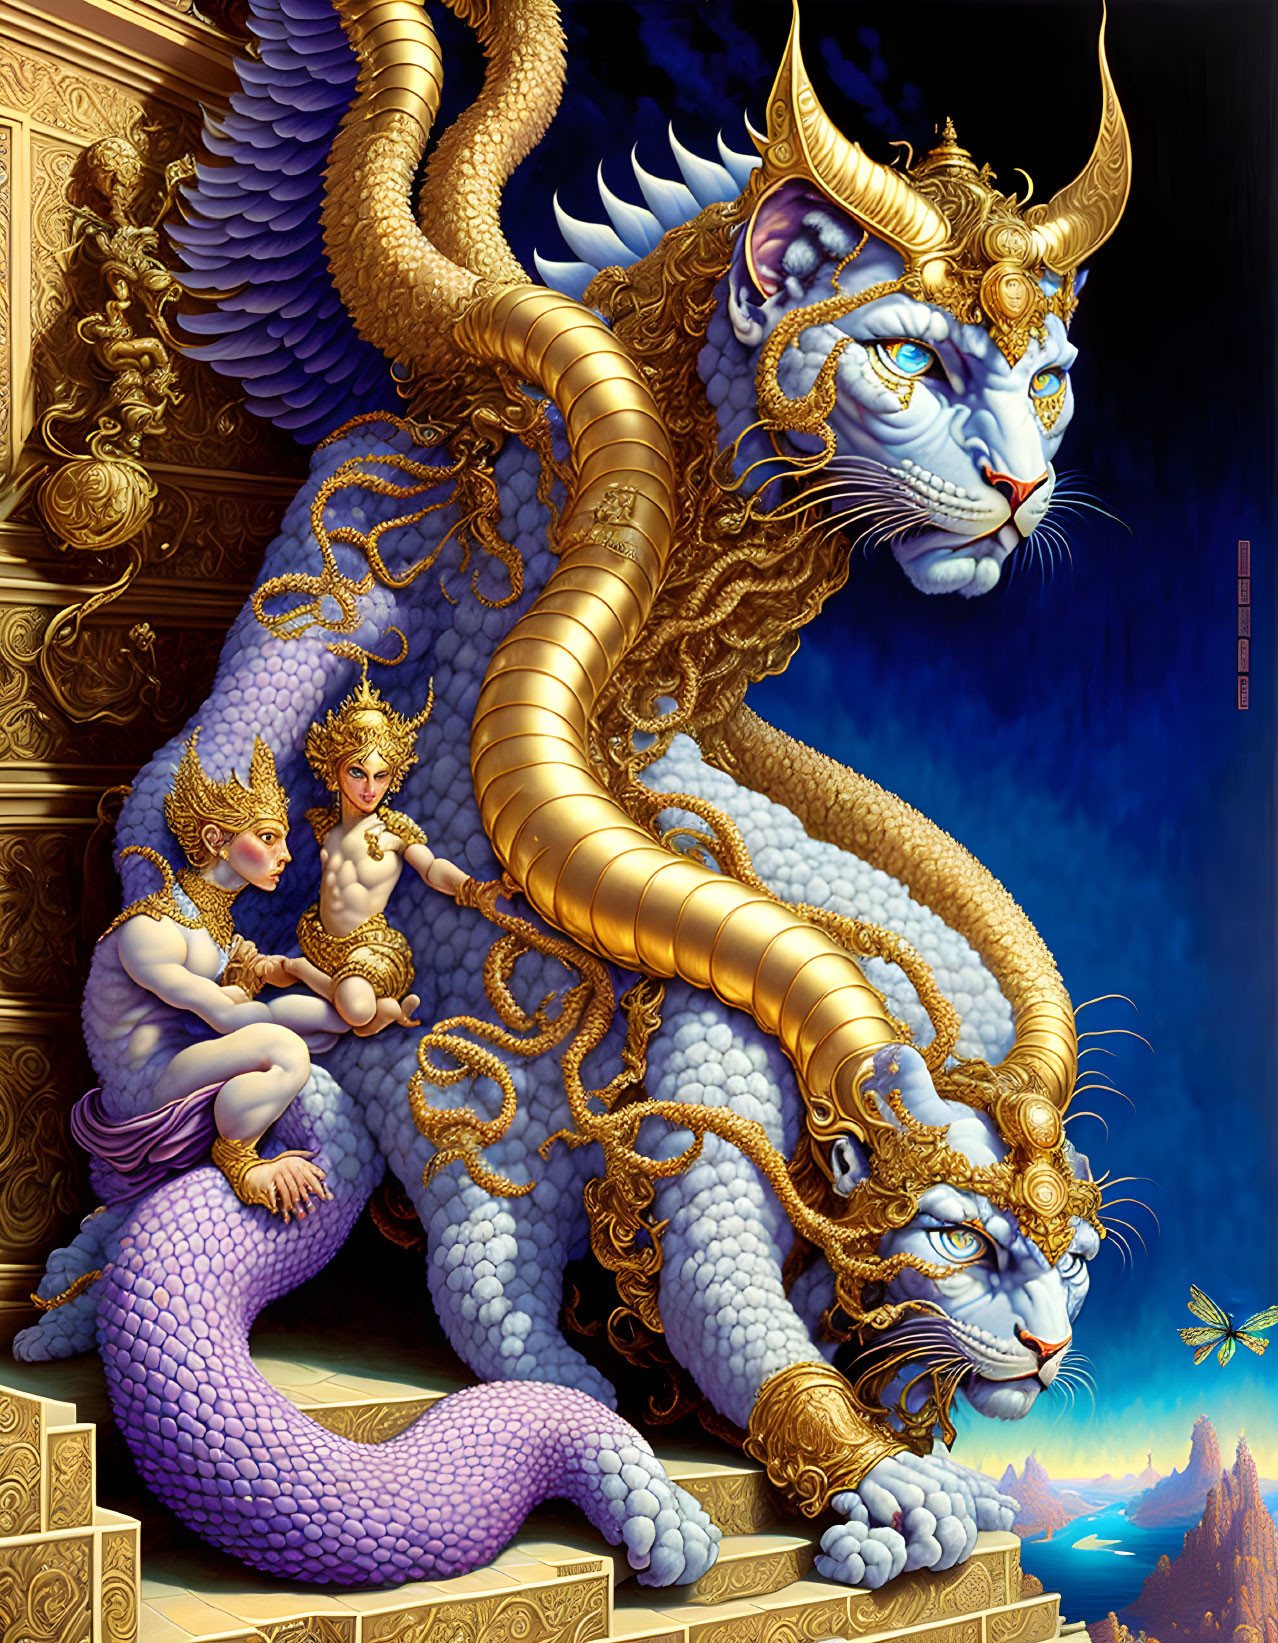 Majestic blue and purple chimera creature with golden accents and winged humanoid companions